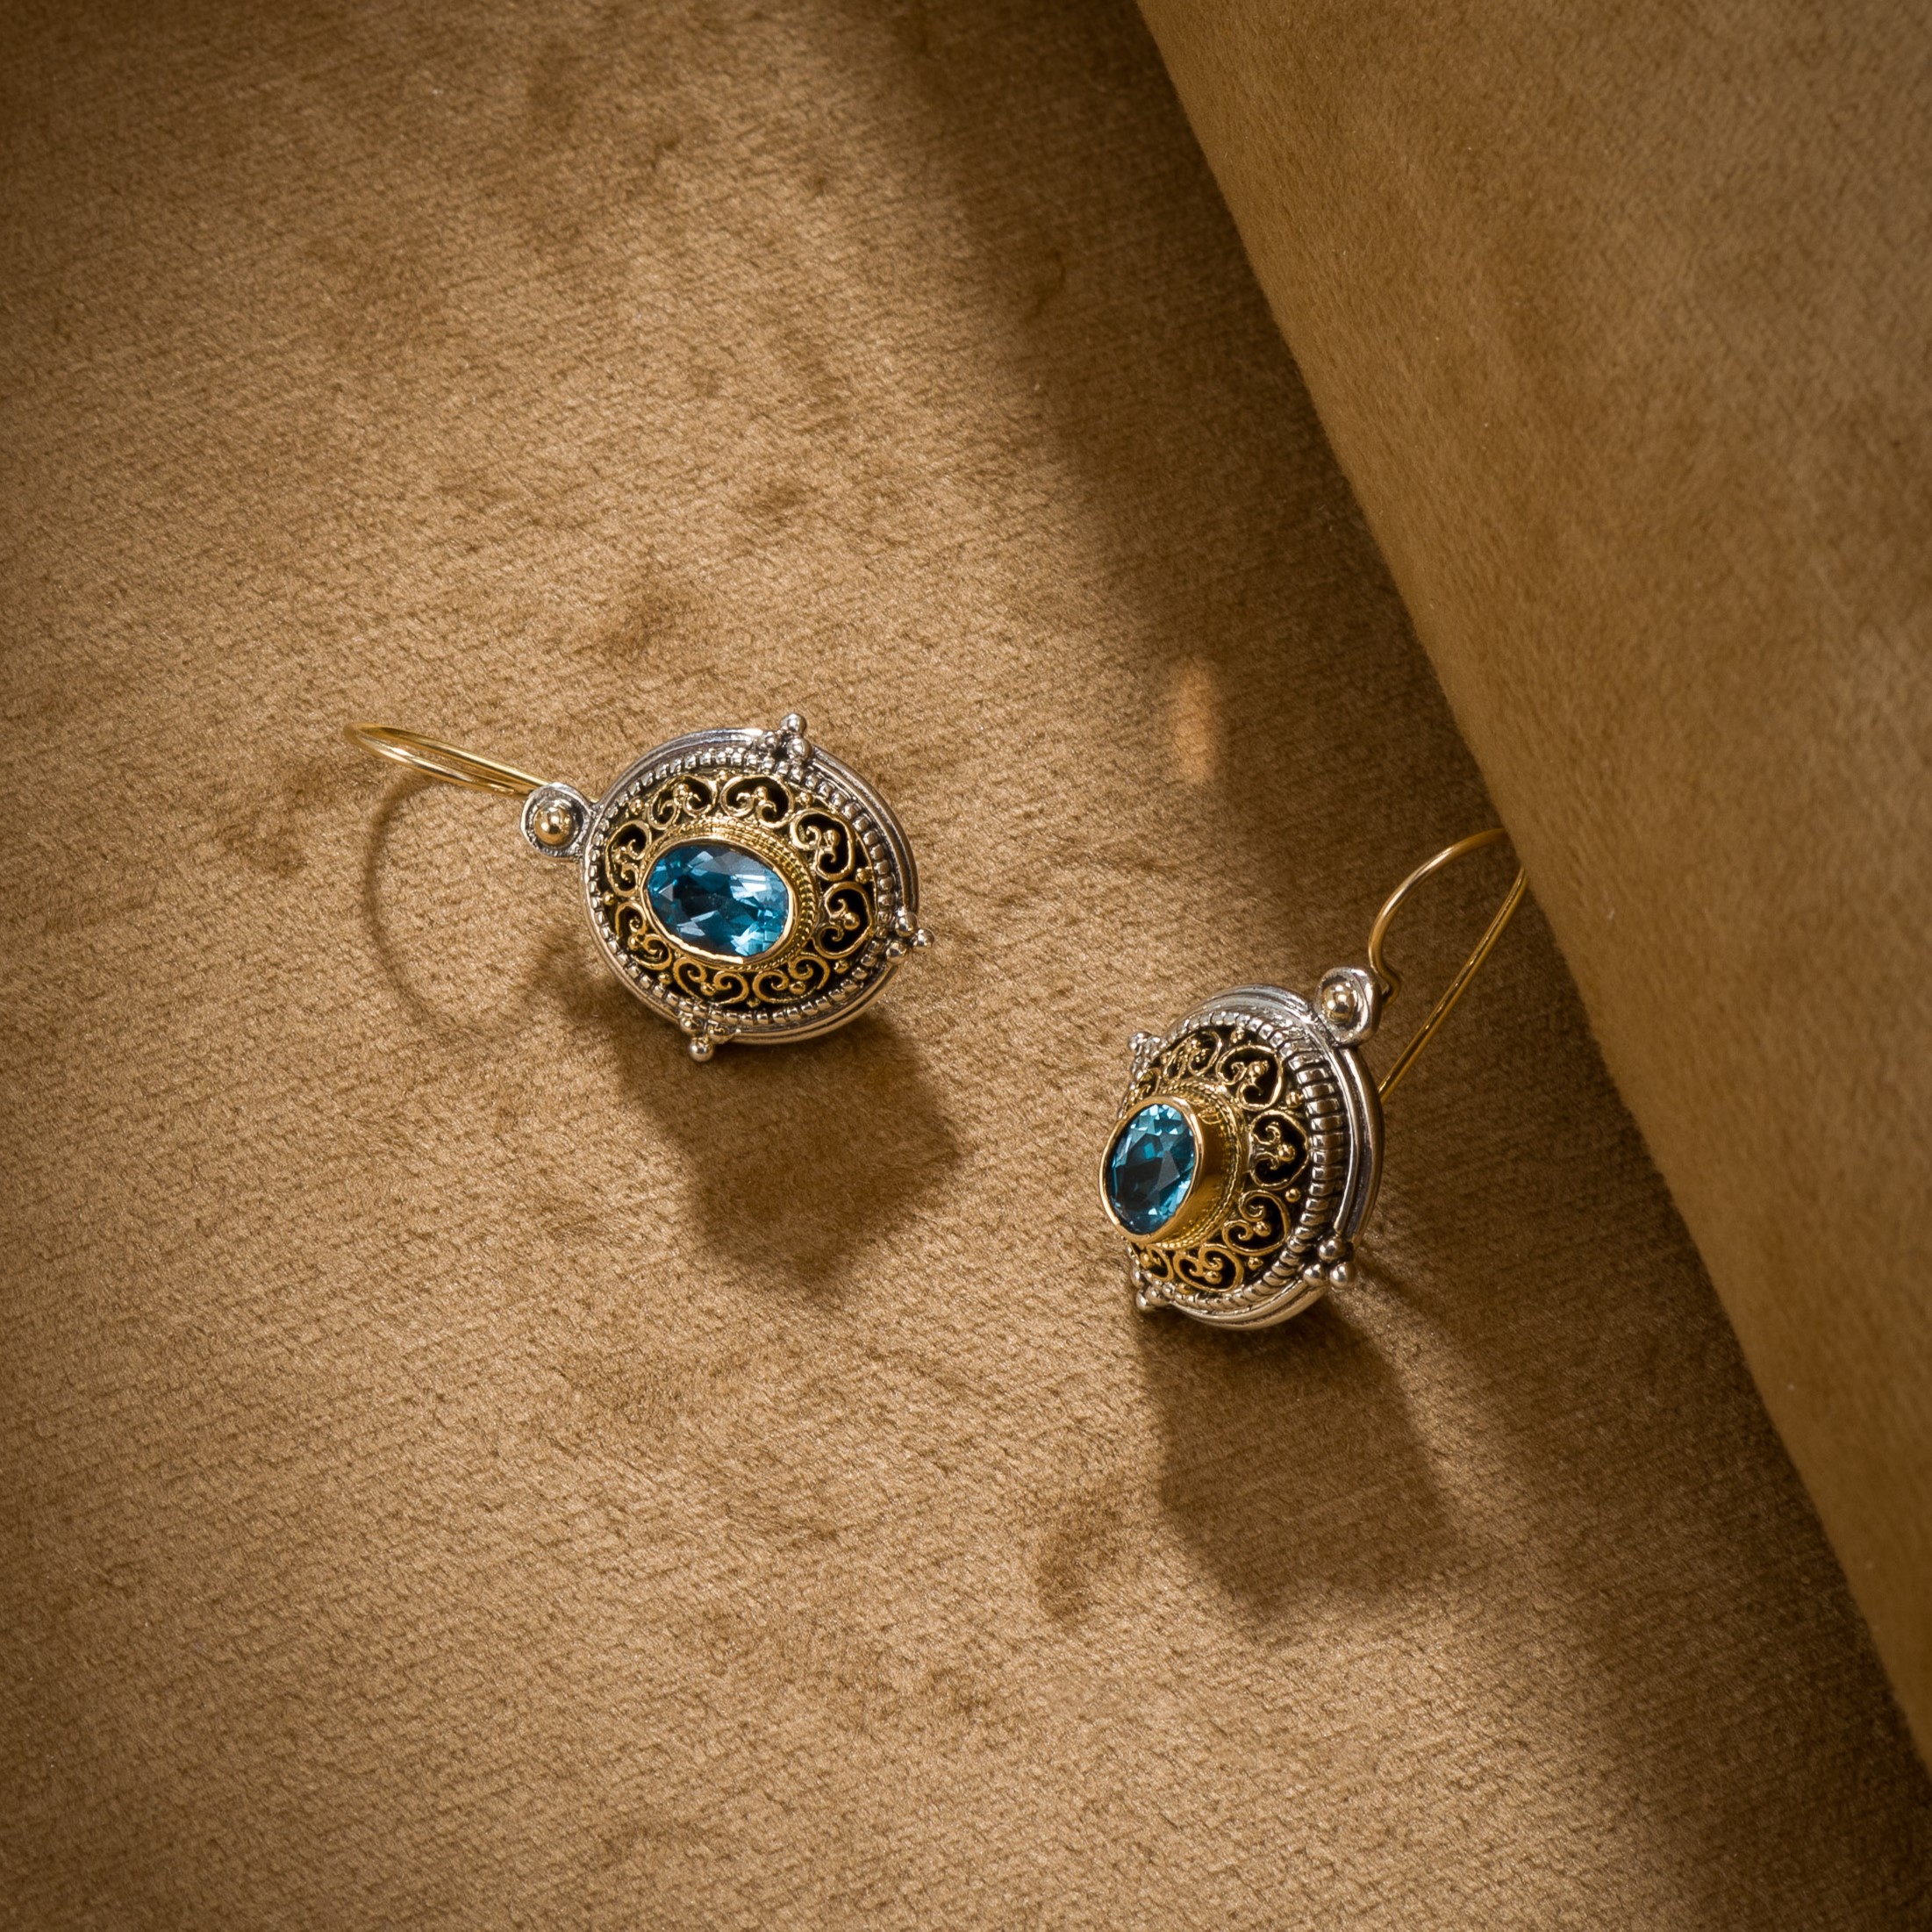 Byzantine earrings in 18K Gold and Sterling Silver with Blue Topaz